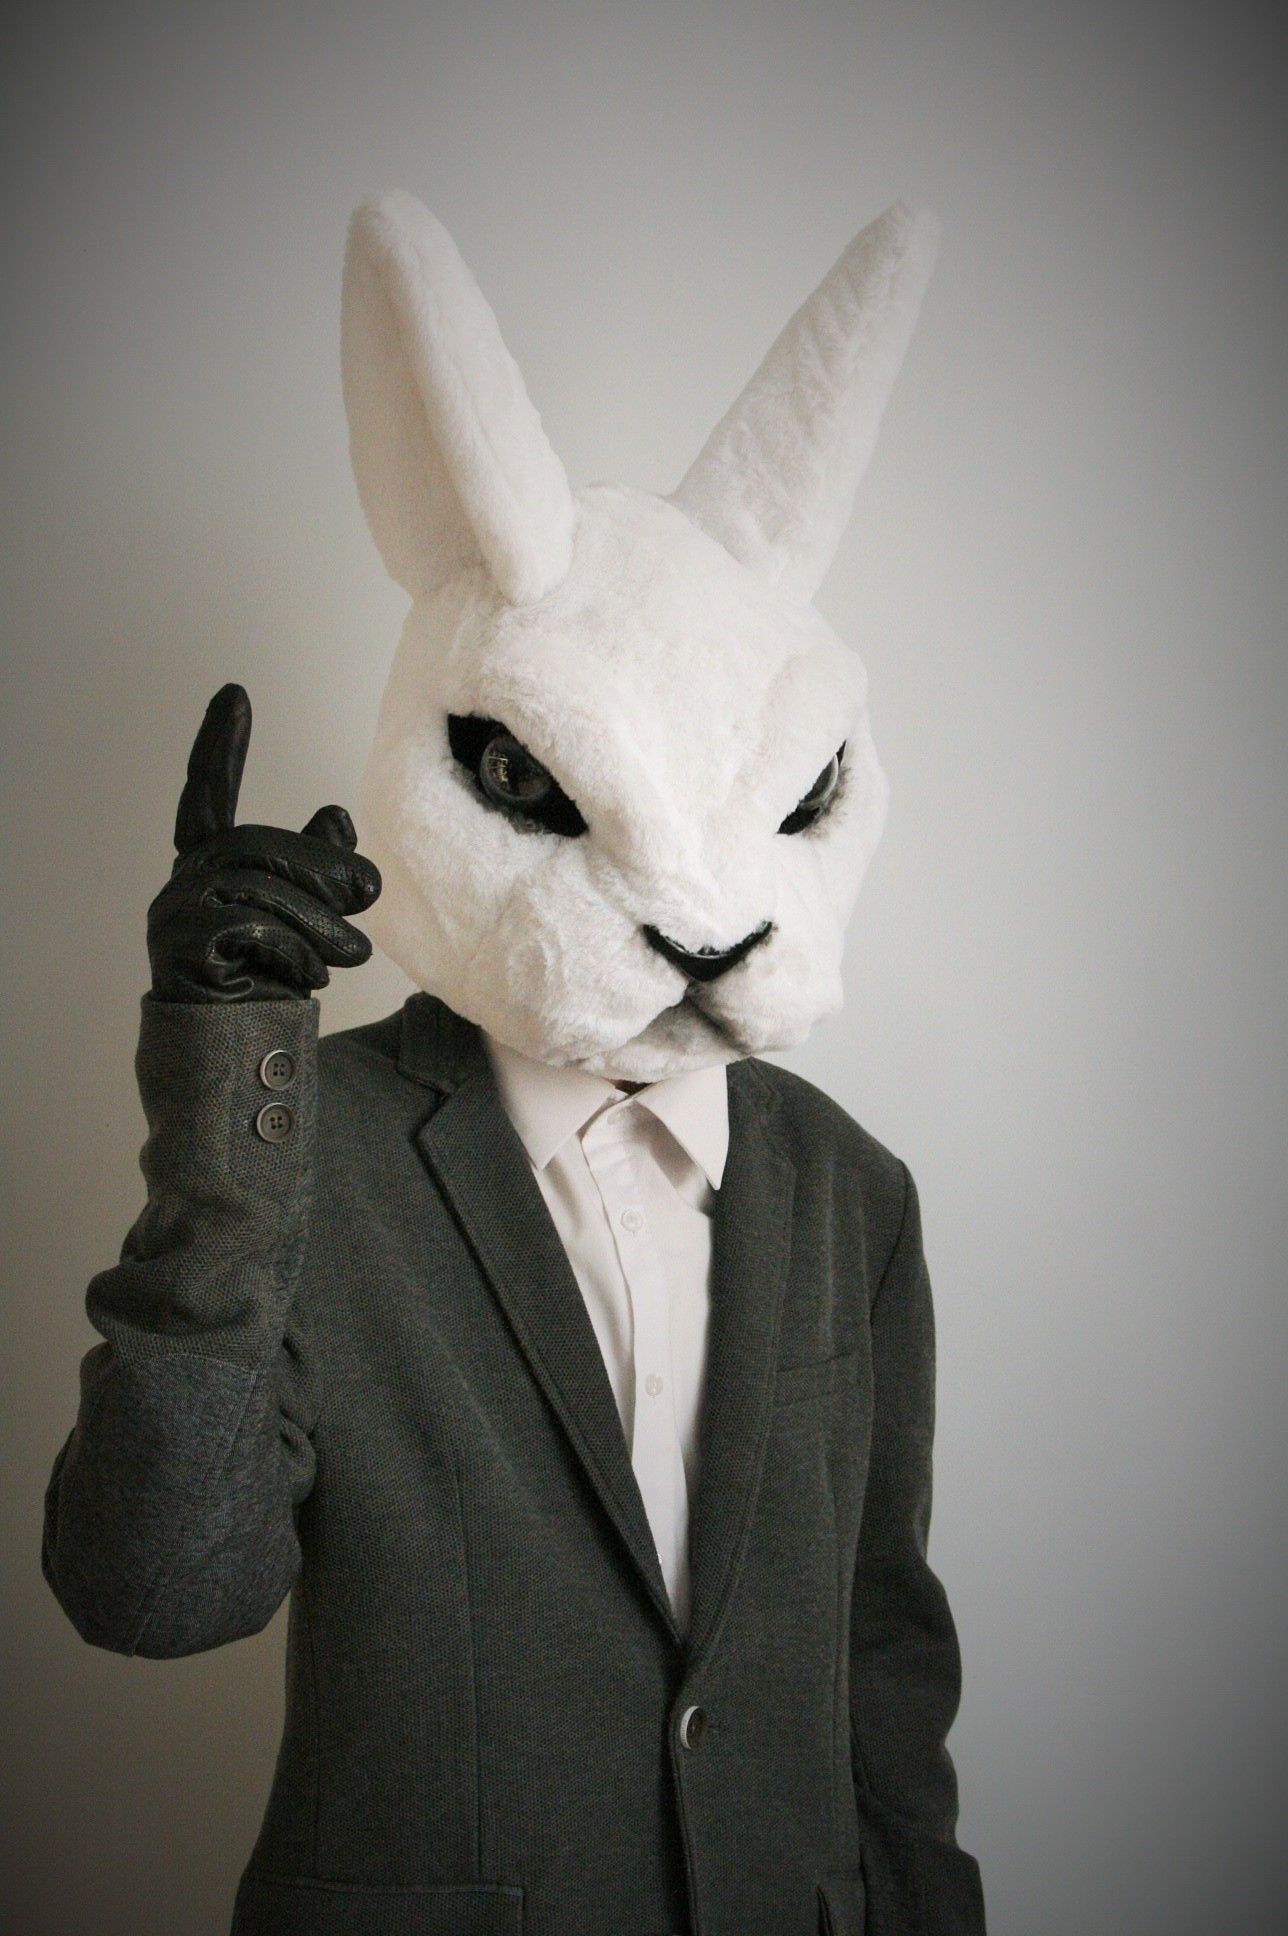 Rabbit head from Misfits show, by Oneandonlycostumes. Animal heads, Creepy art, Horror art